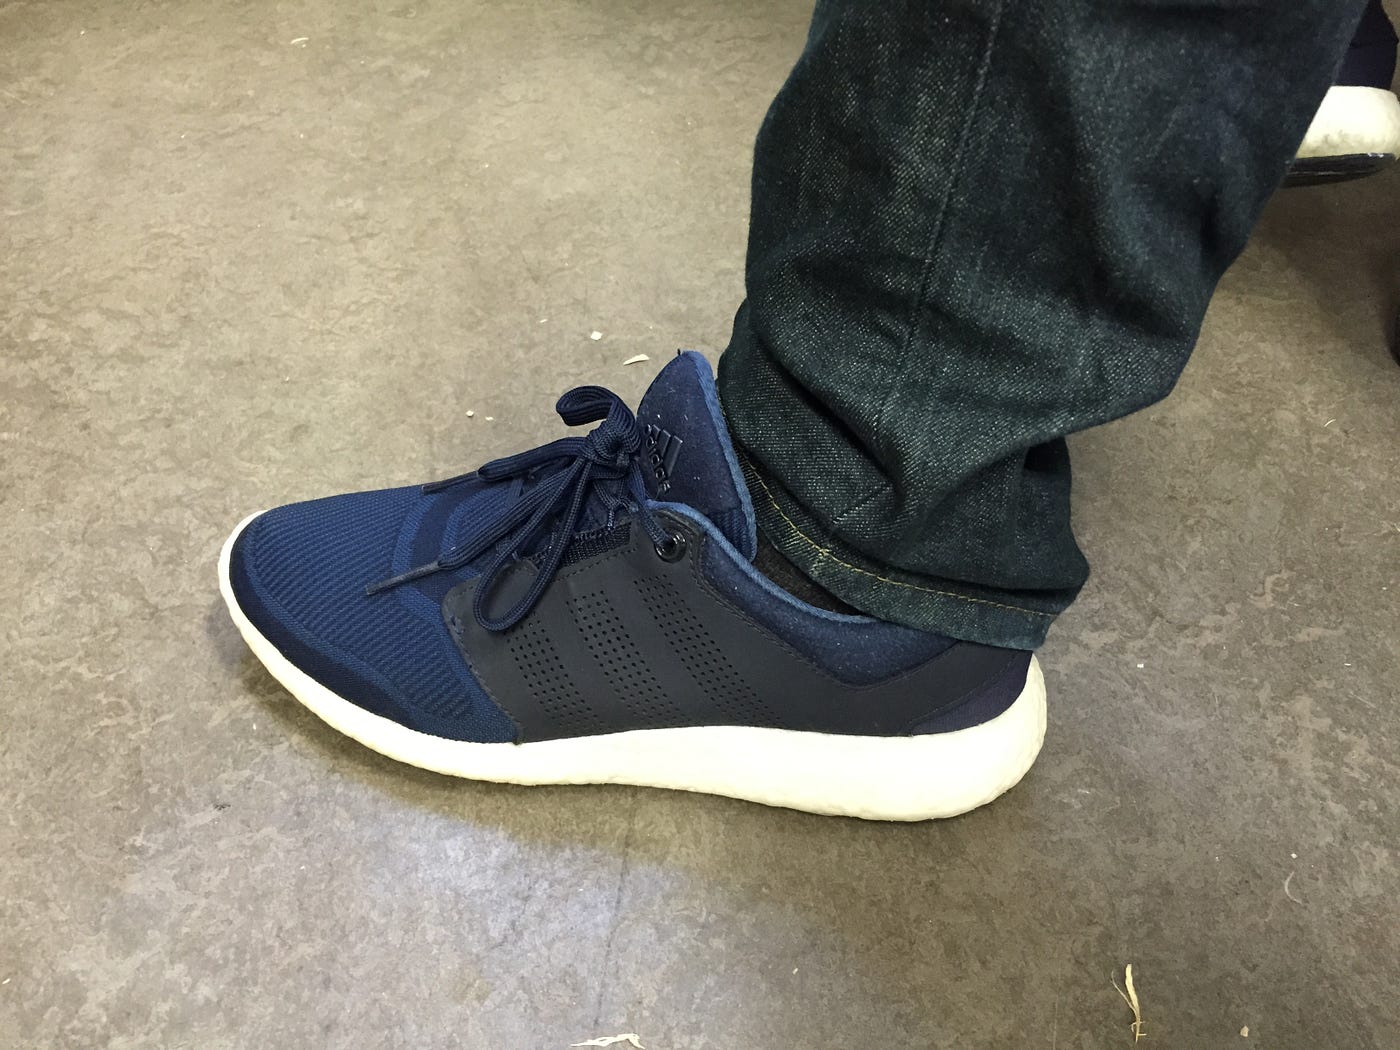 Adidas Pure Boost X Review - The Runner Beans